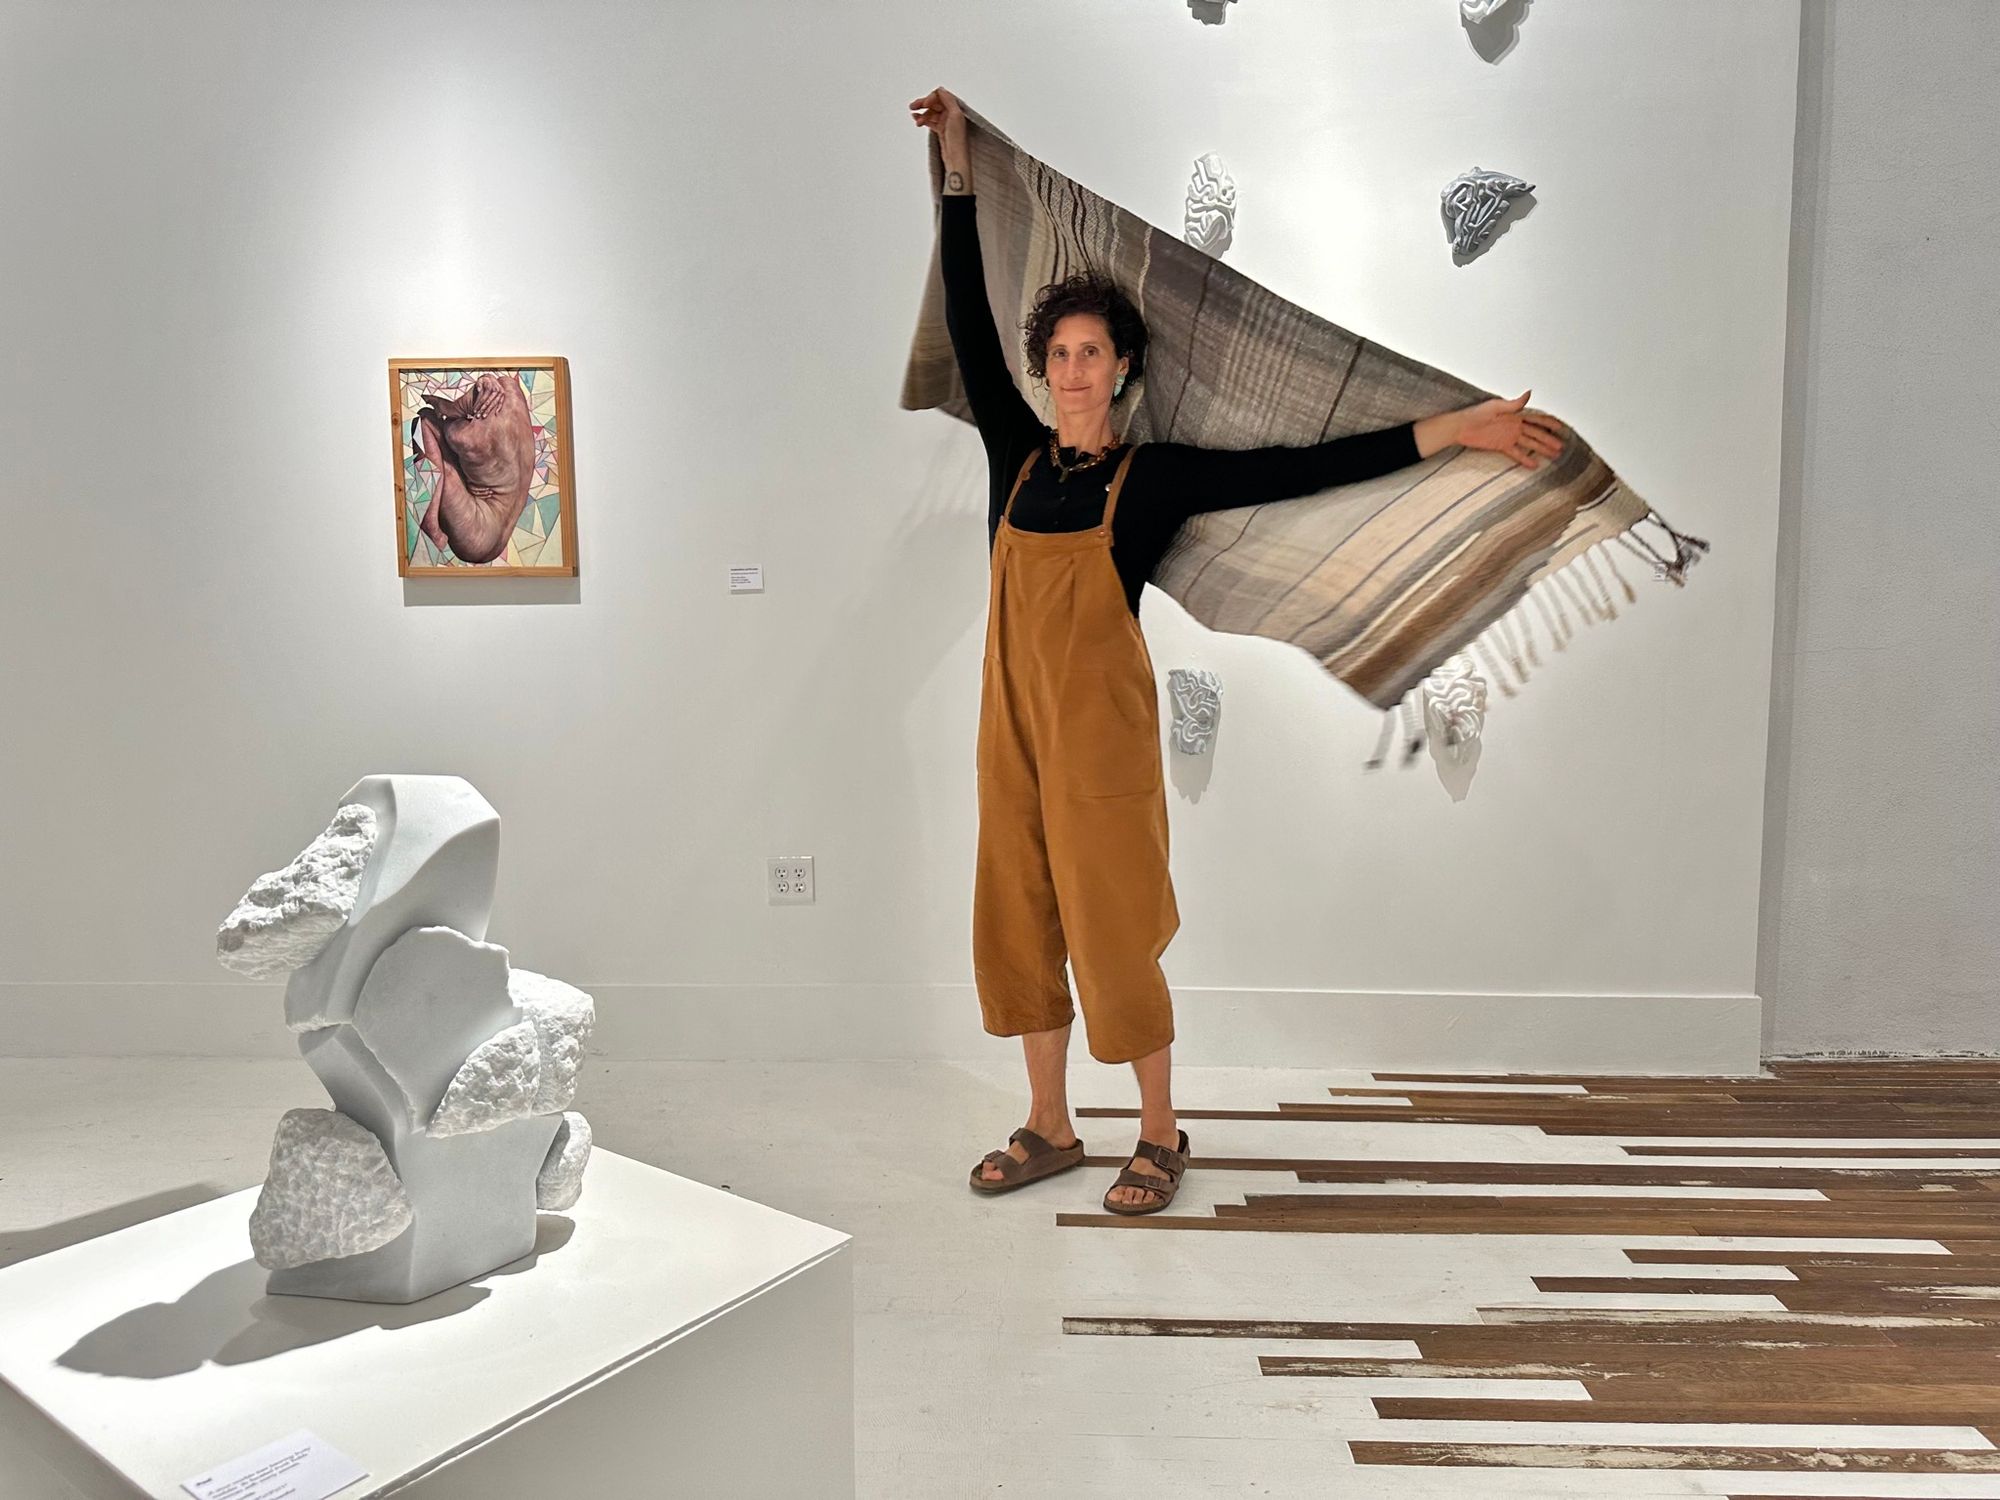 A woman wearing ochre colored overalls wears a brown, tan, white gradation shawl while moving around in a white and wooden gallery space with marble sculptures and oil paintings all around